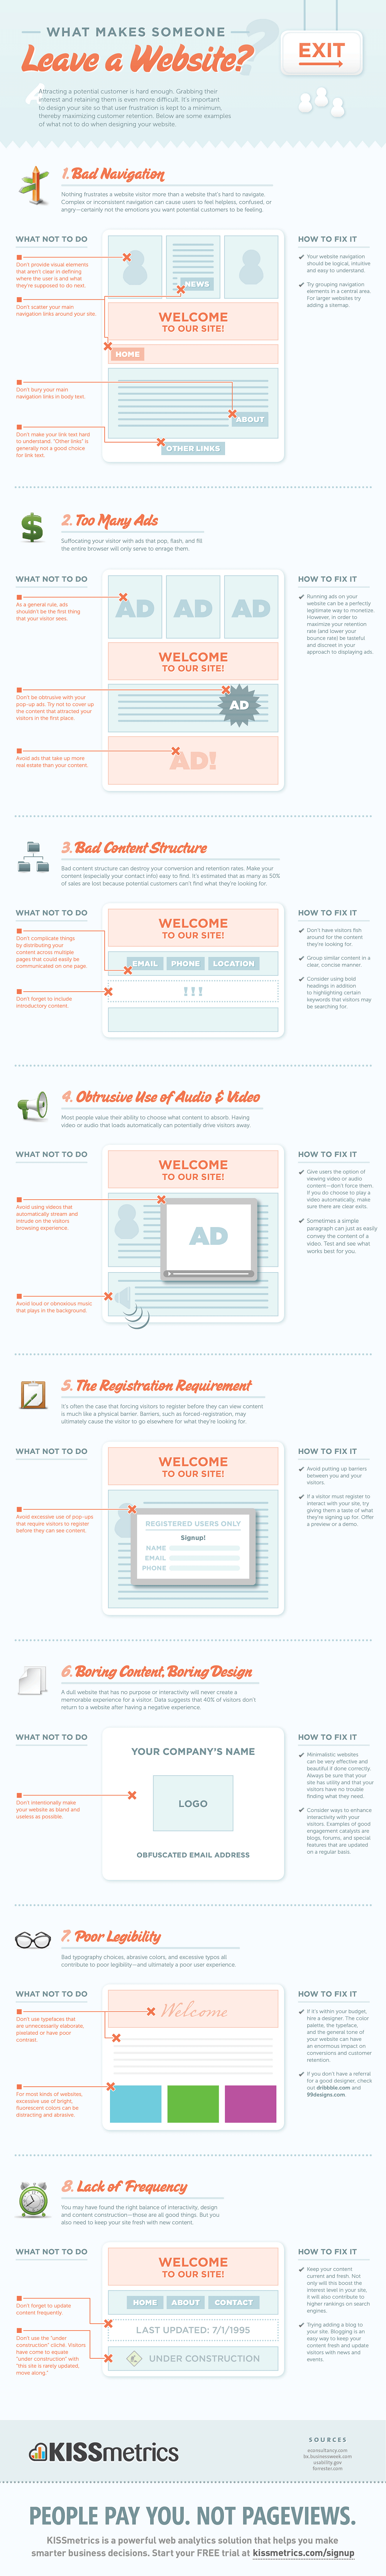 [Infographic] Reasons of High Website Bounce Rates and How to Fix it